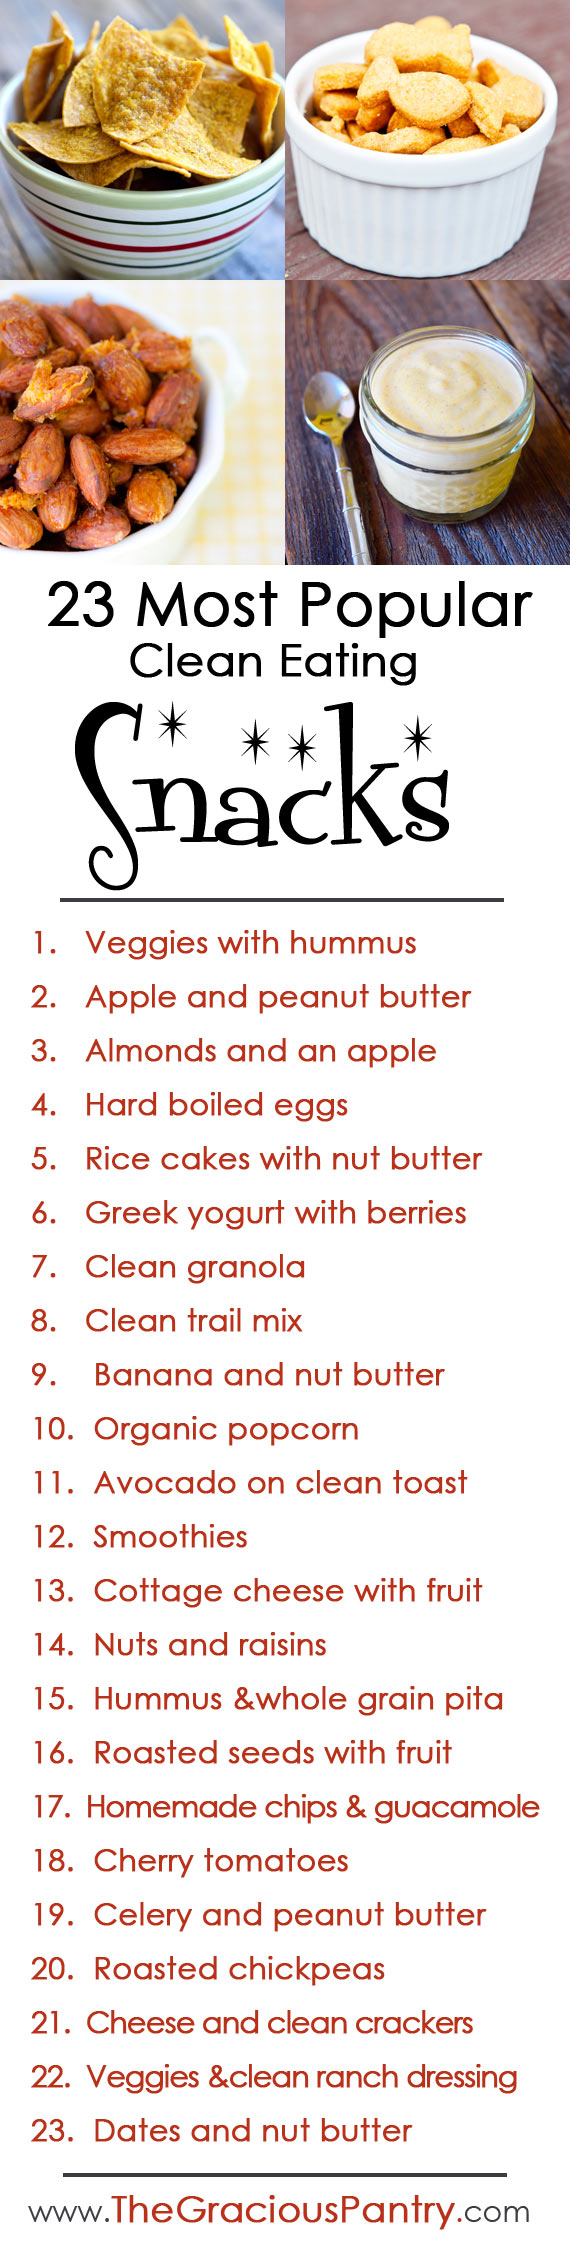 23 Clean Eating Snack Ideas